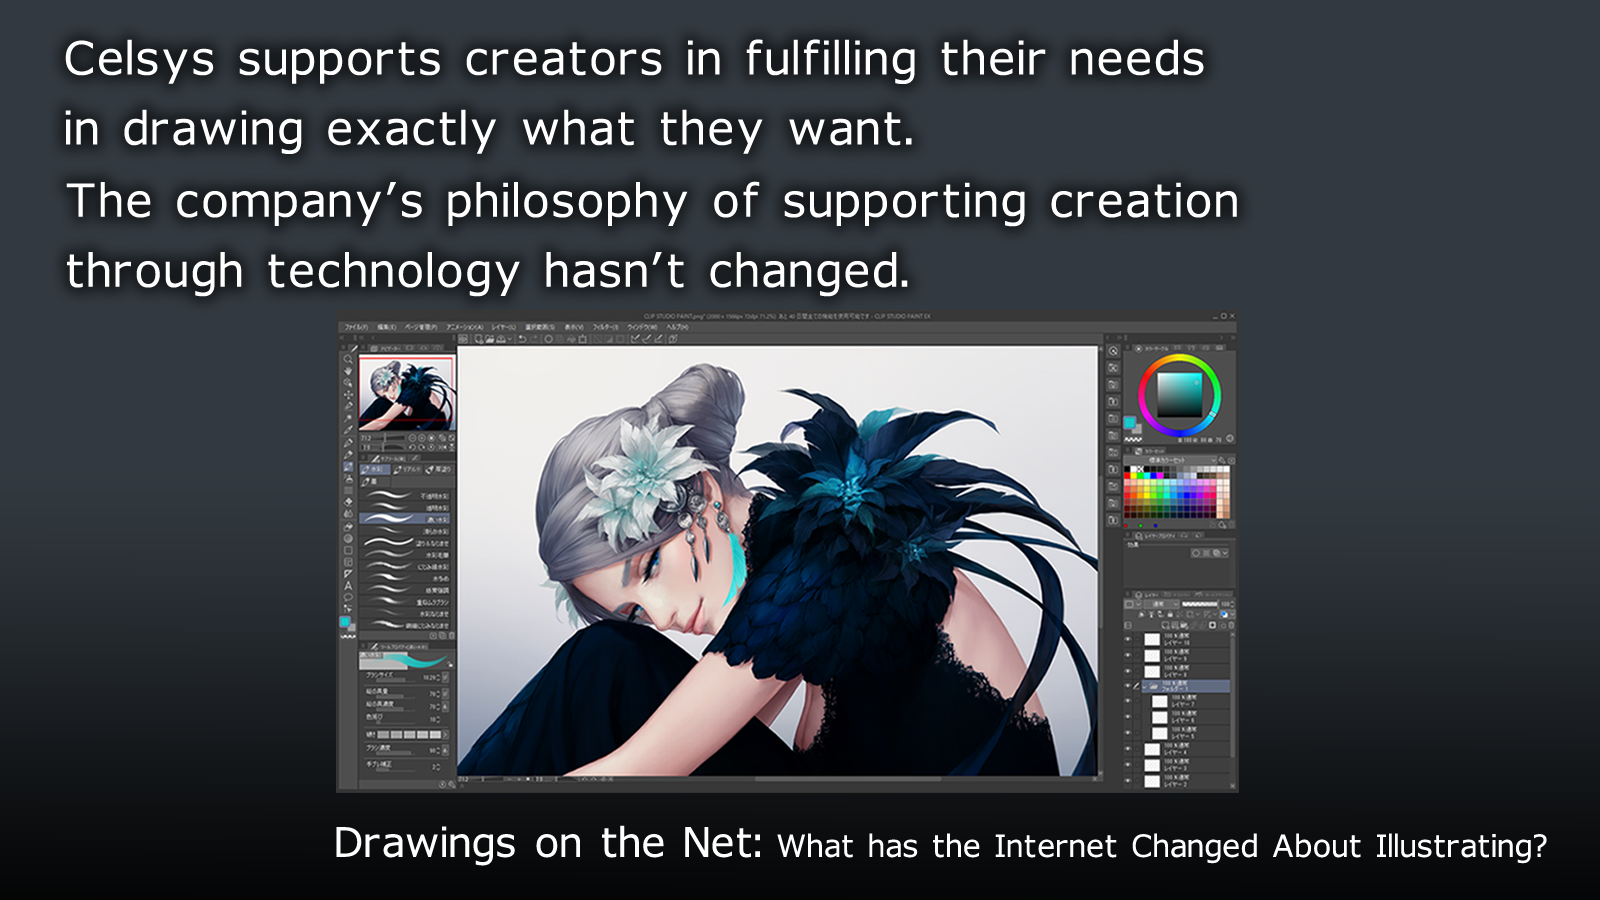 Celsys publishes their interview from the book: &quot;Drawings on the Net: What has the Internet Changed About Illustrating?&quot;